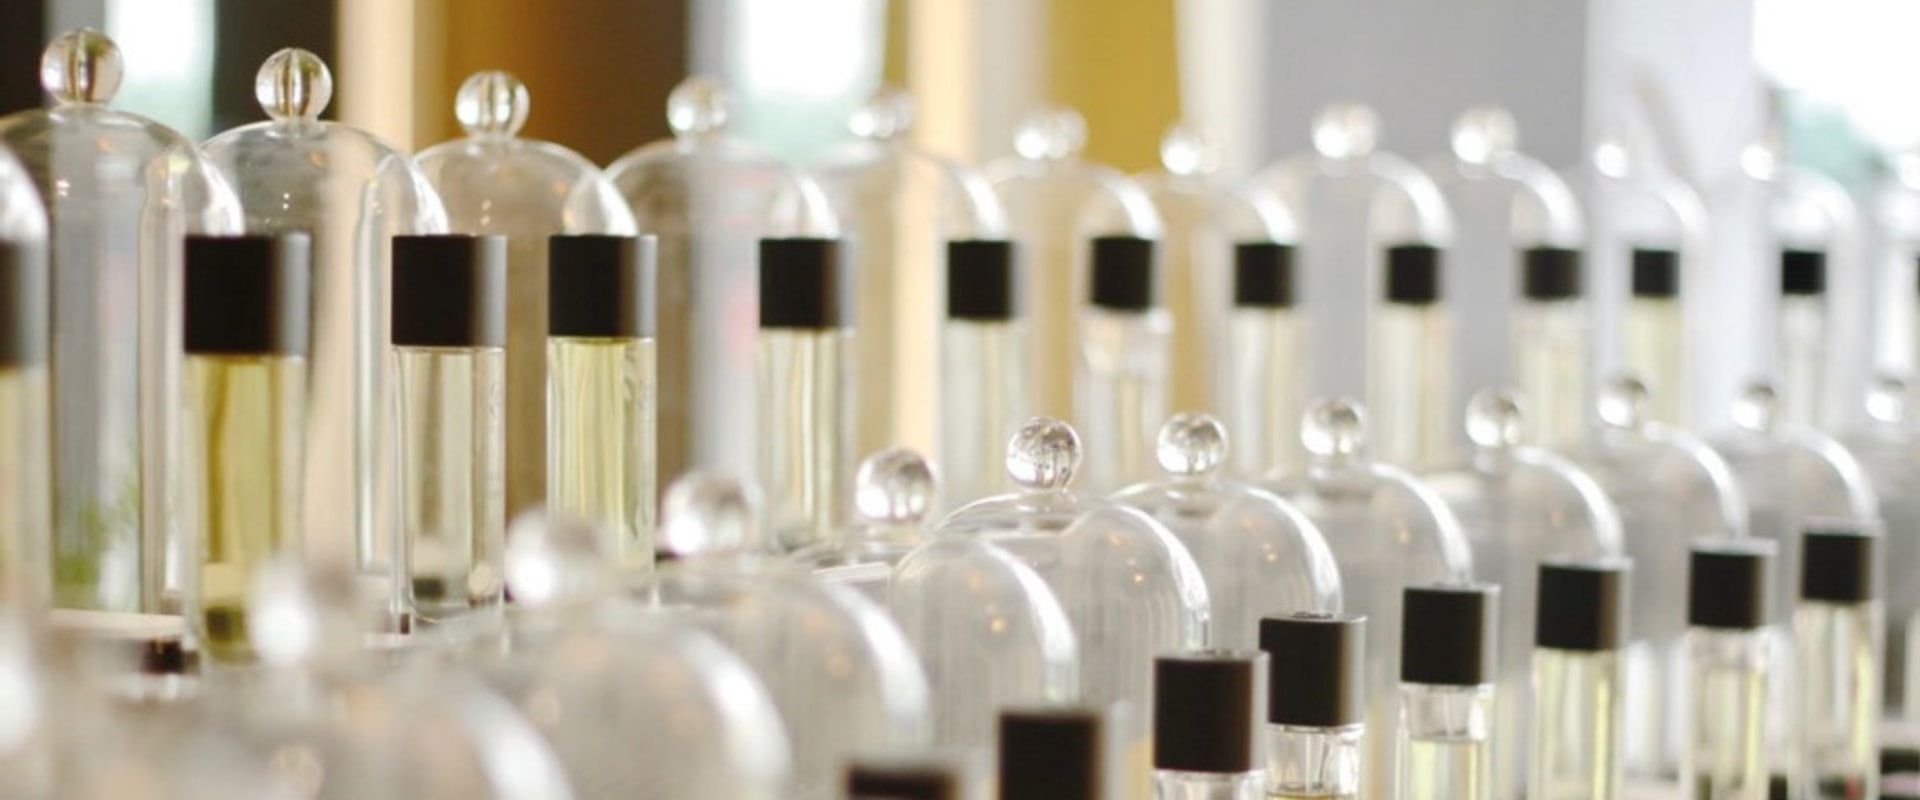 Create Your Own Bespoke Fragrances and Custom Perfume in Singapore